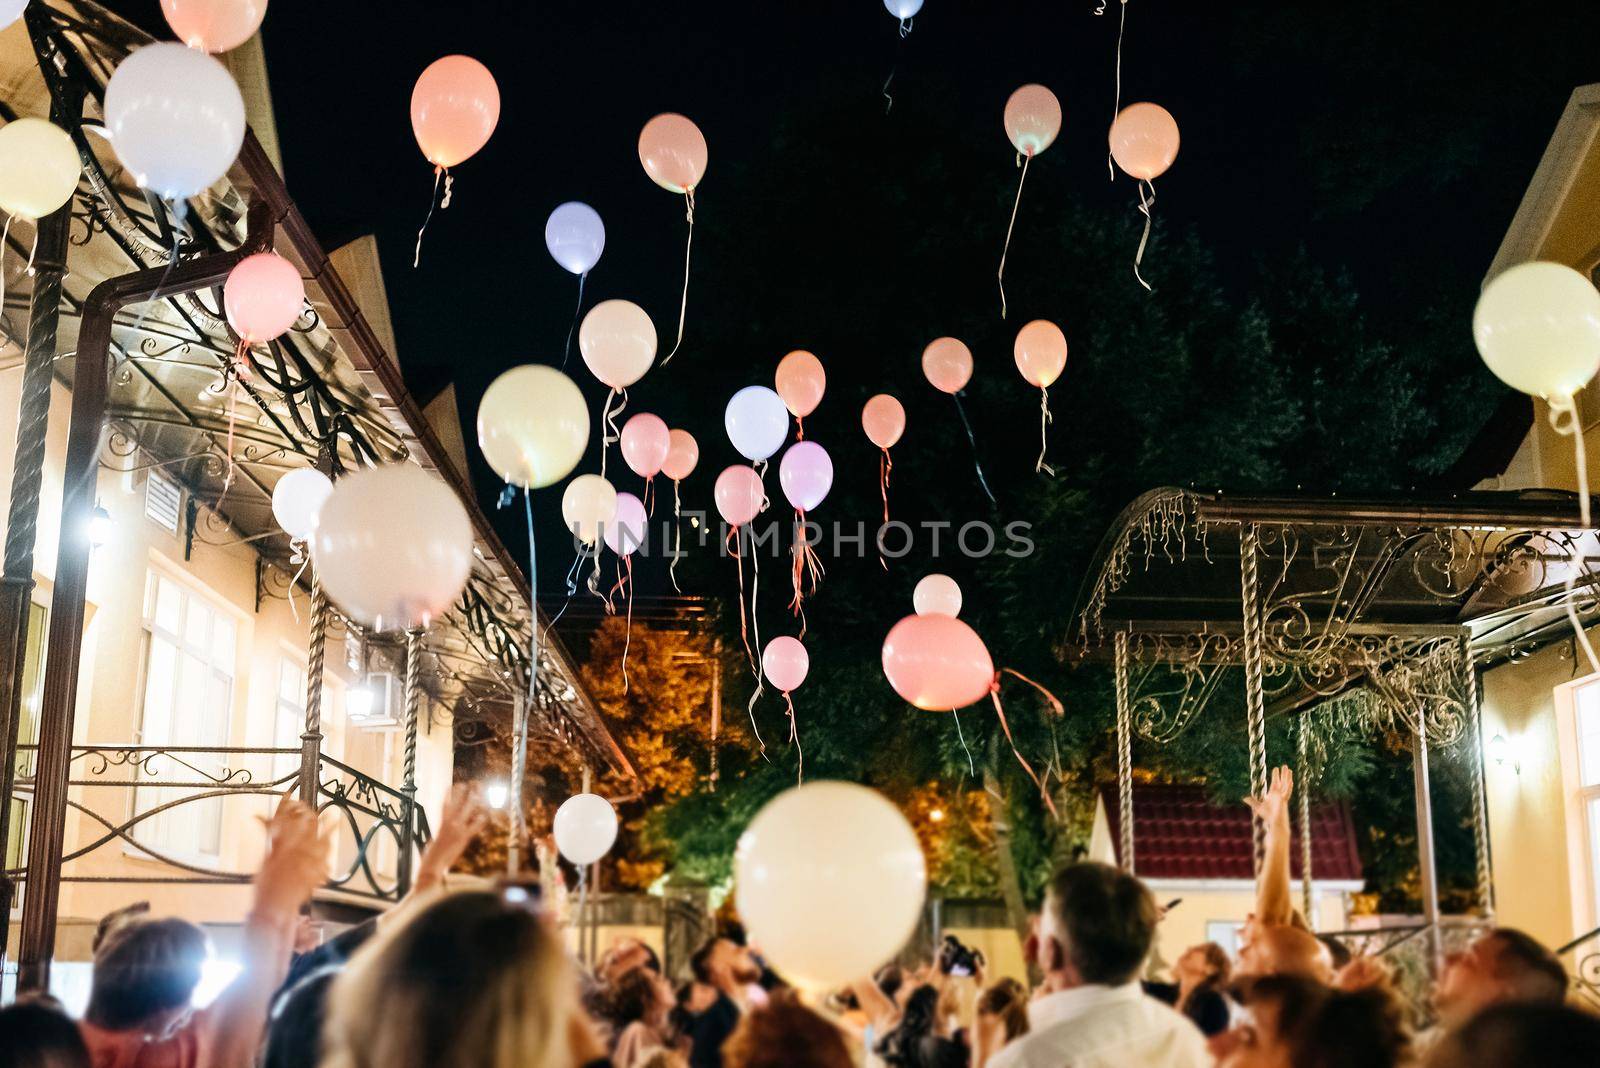 Crowd Throwing Colorful Balloons to Sky at night During Festival or wedding party by Mariakray